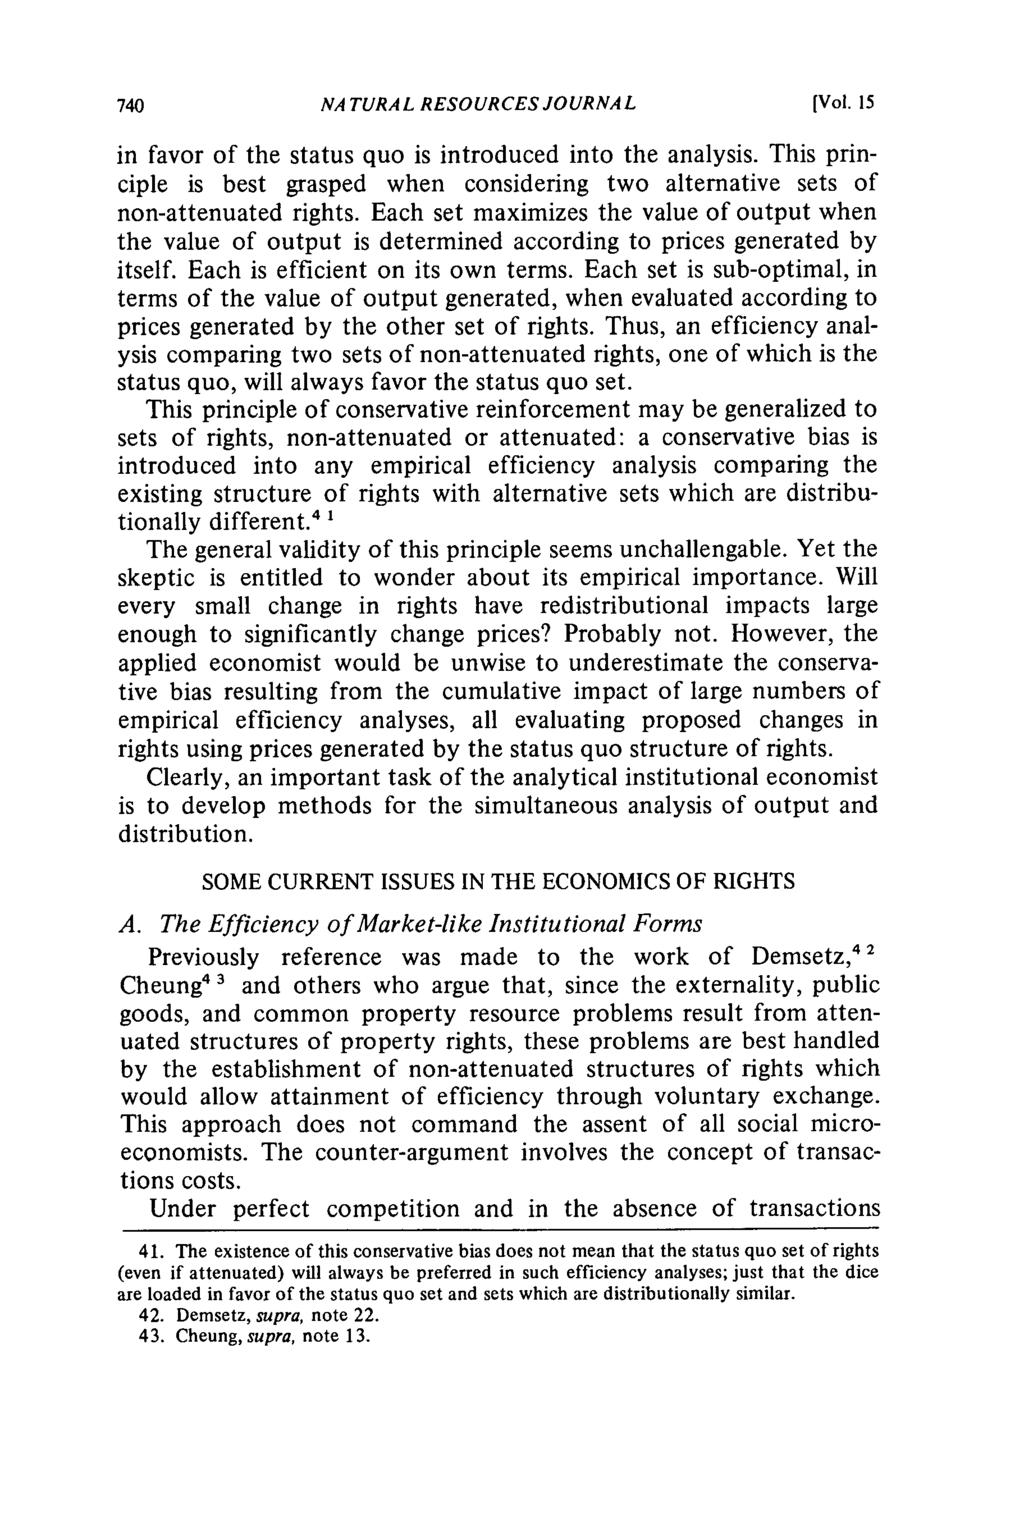 NA TURAL RESOURCES JOURNAL [Vol. 15 in favor of the status quo is introduced into the analysis. This principle is best grasped when considering two alternative sets of non-attenuated rights.